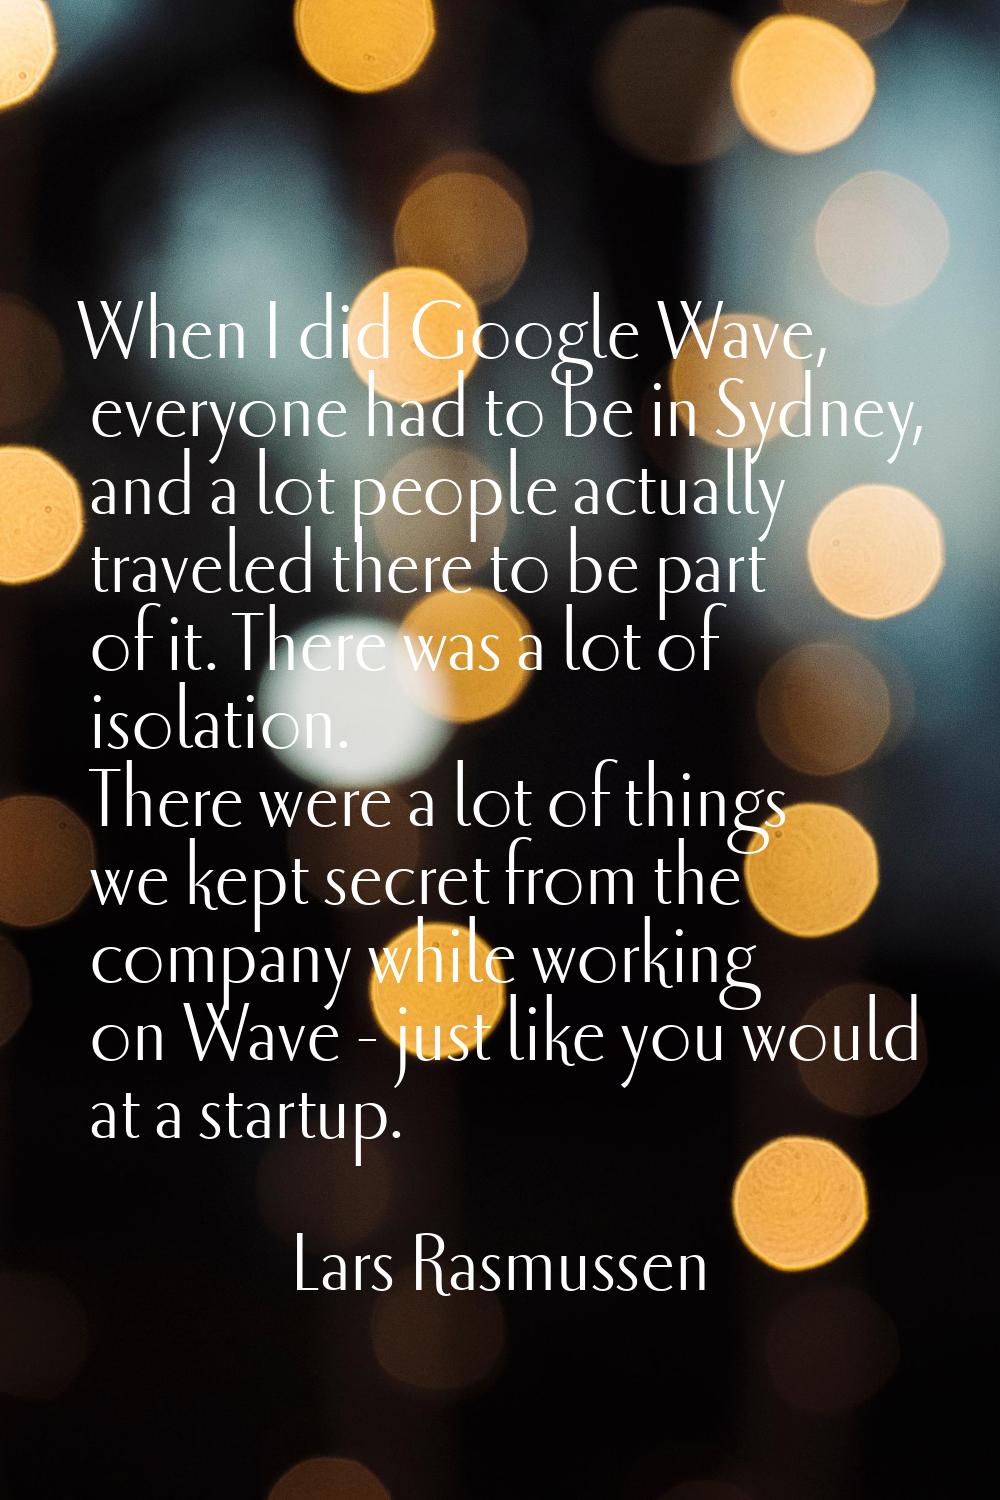 When I did Google Wave, everyone had to be in Sydney, and a lot people actually traveled there to b